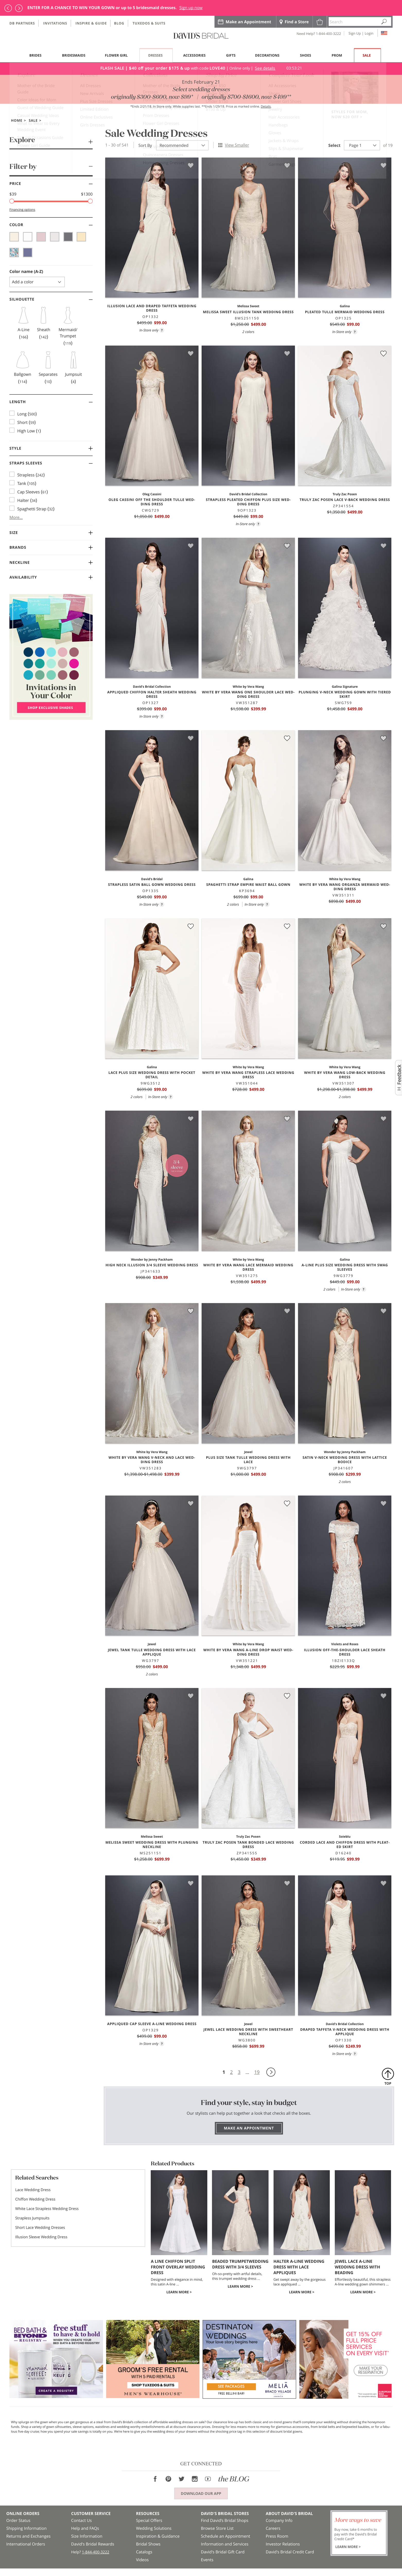 Wedding Dresses Results Page